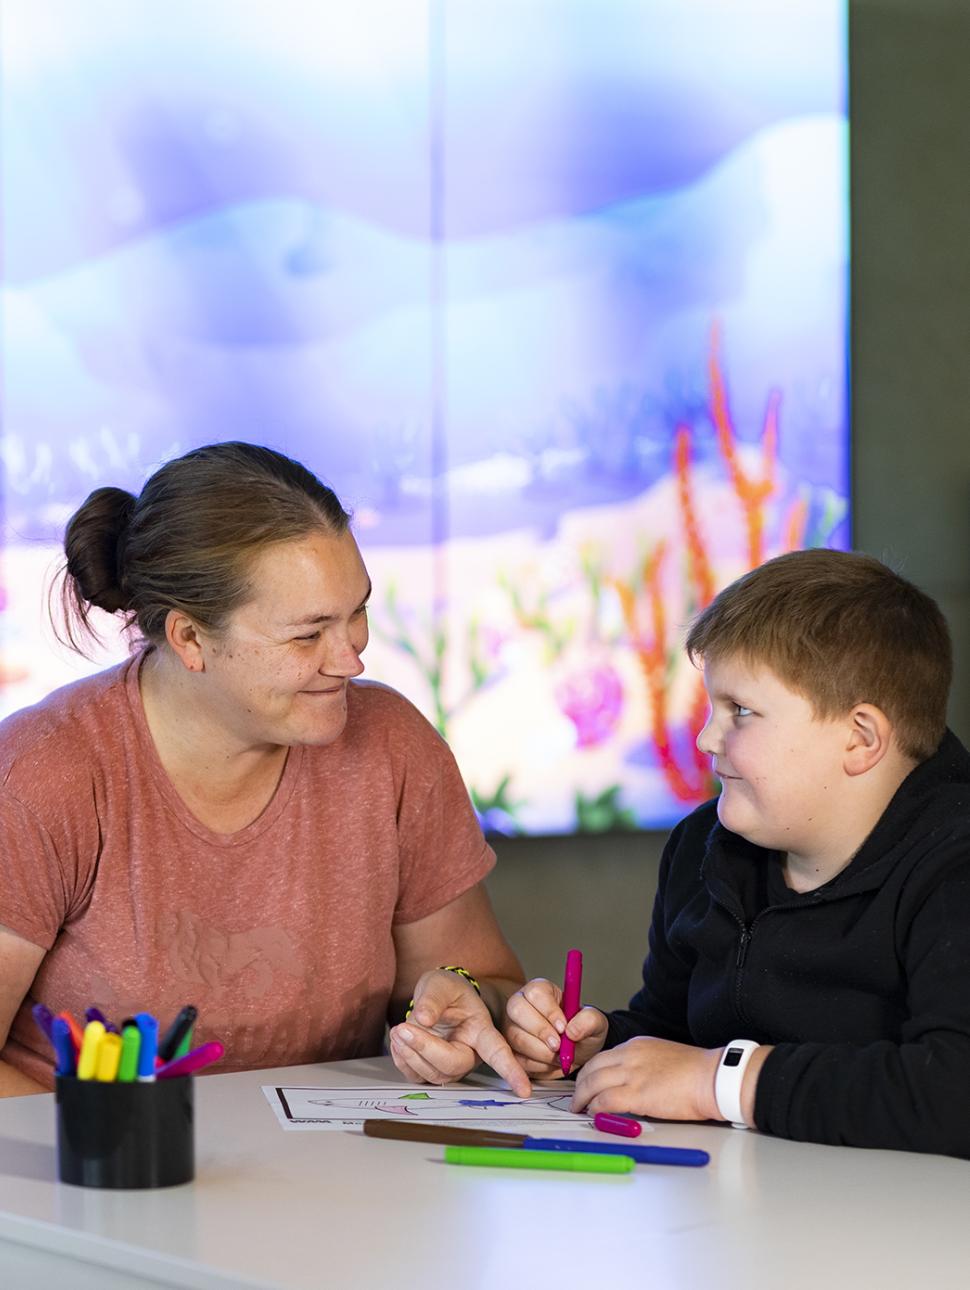 A parent with a child is sitting at a table colouring with a digital screen in the background depicting a sea scene